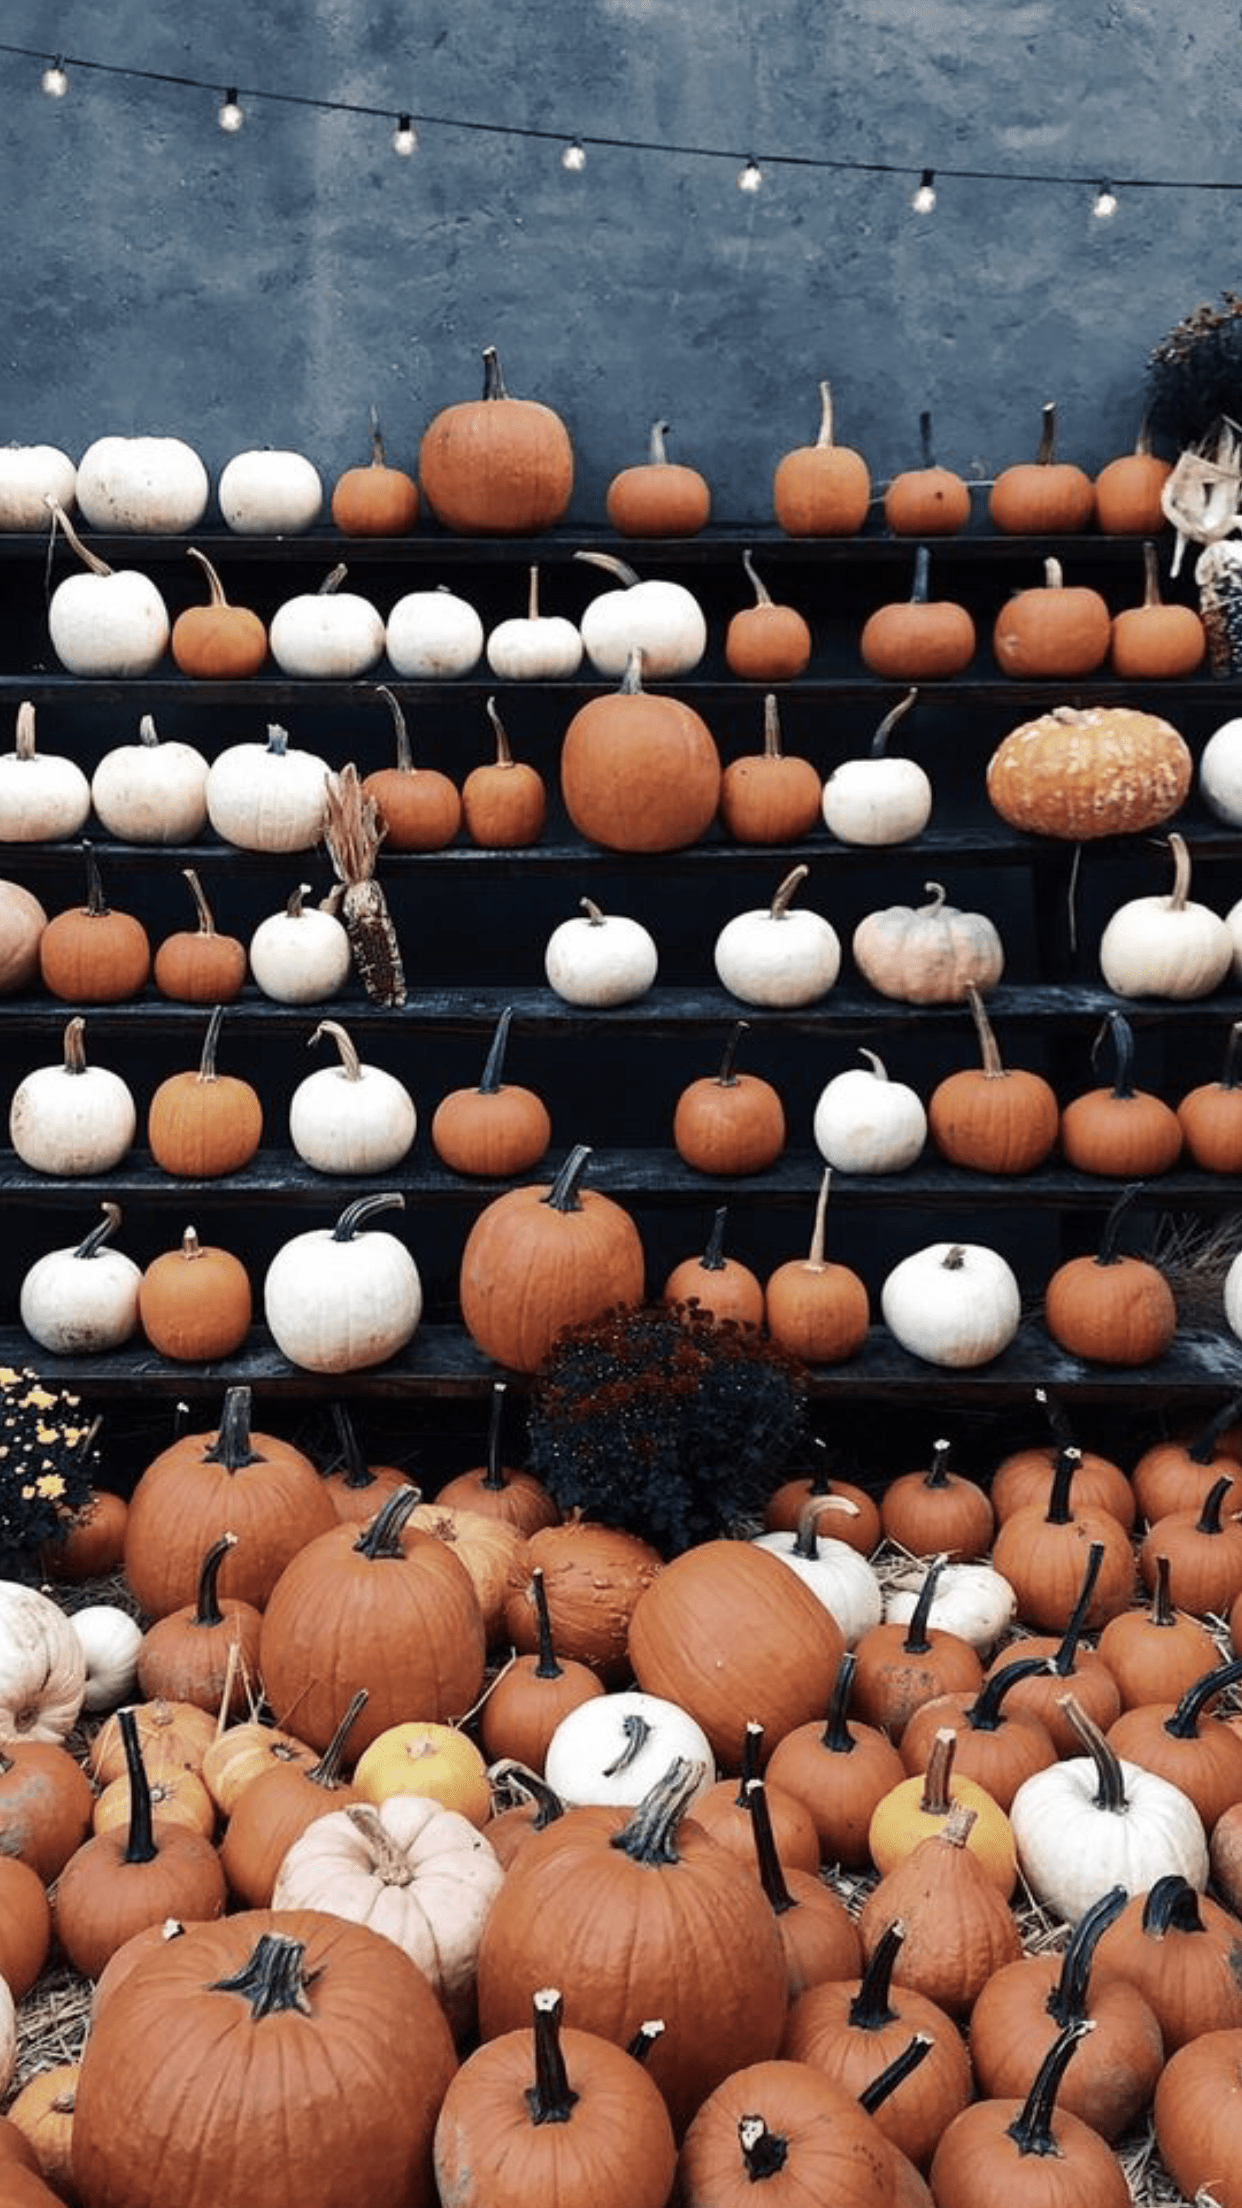 A large number of pumpkins are displayed - Fall, fall iPhone